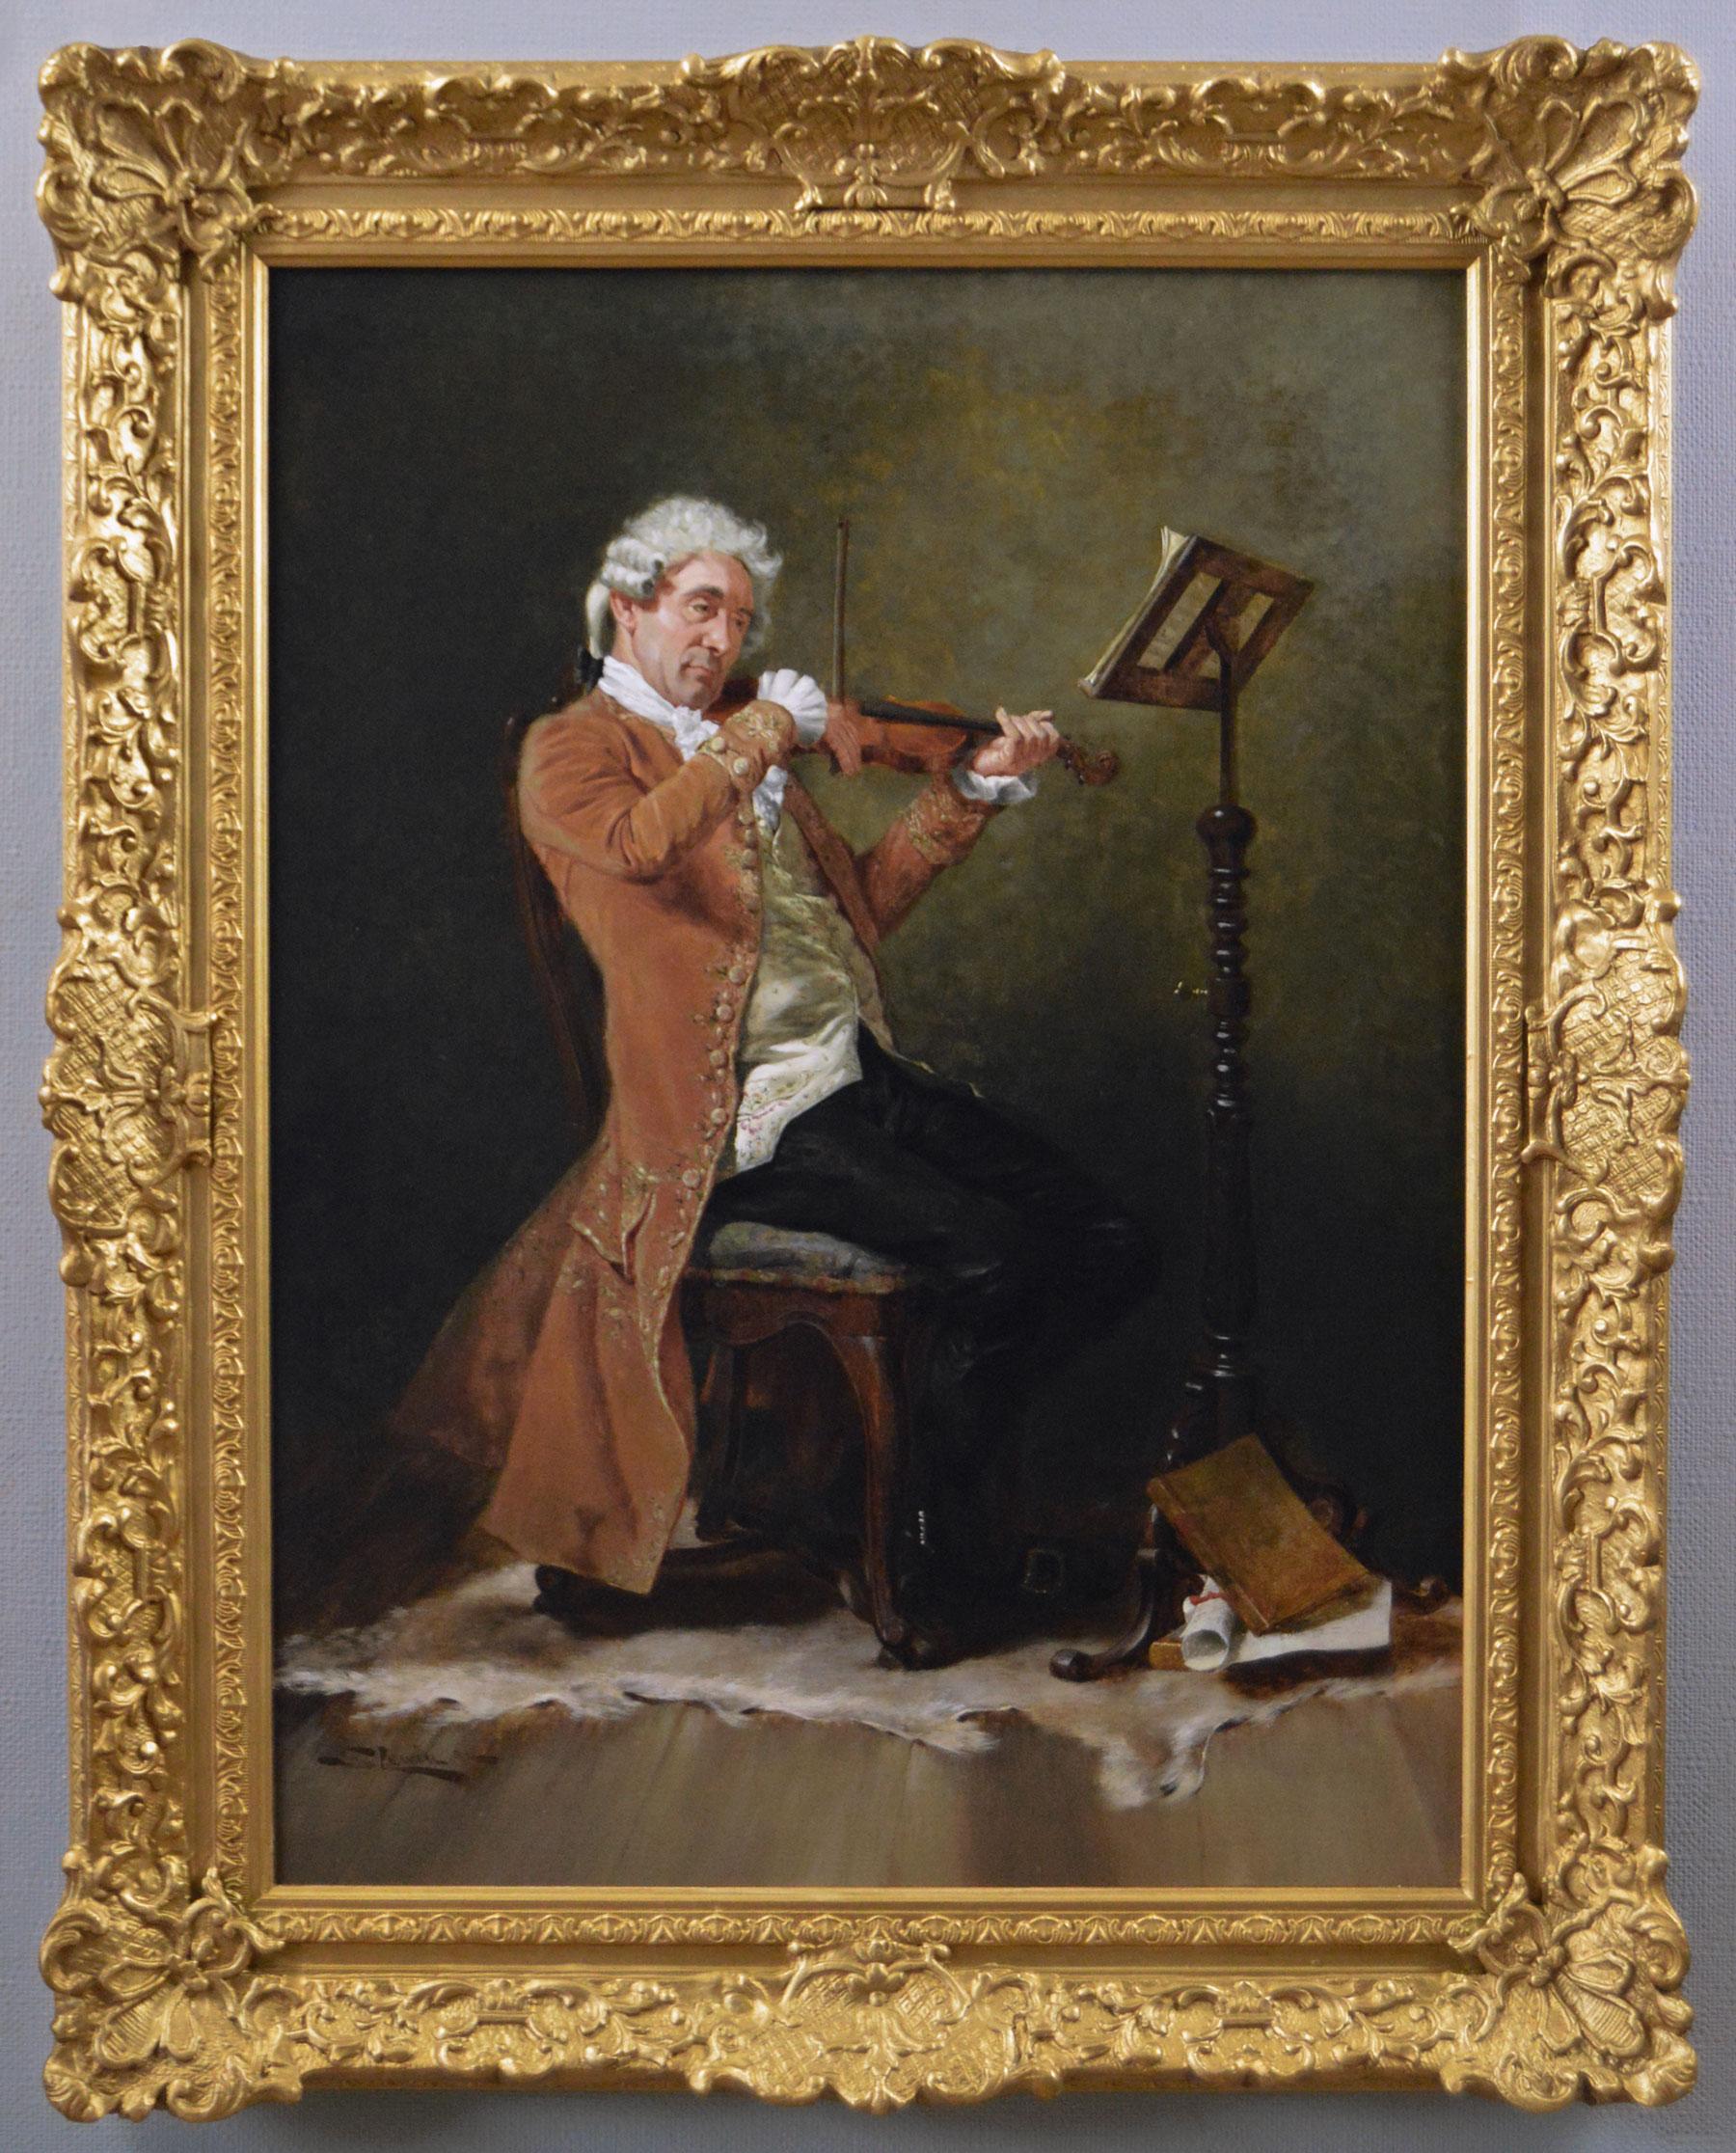 Stephen Lewin Interior Painting - 19th Century genre historical oil painting of a gentleman playing a violin